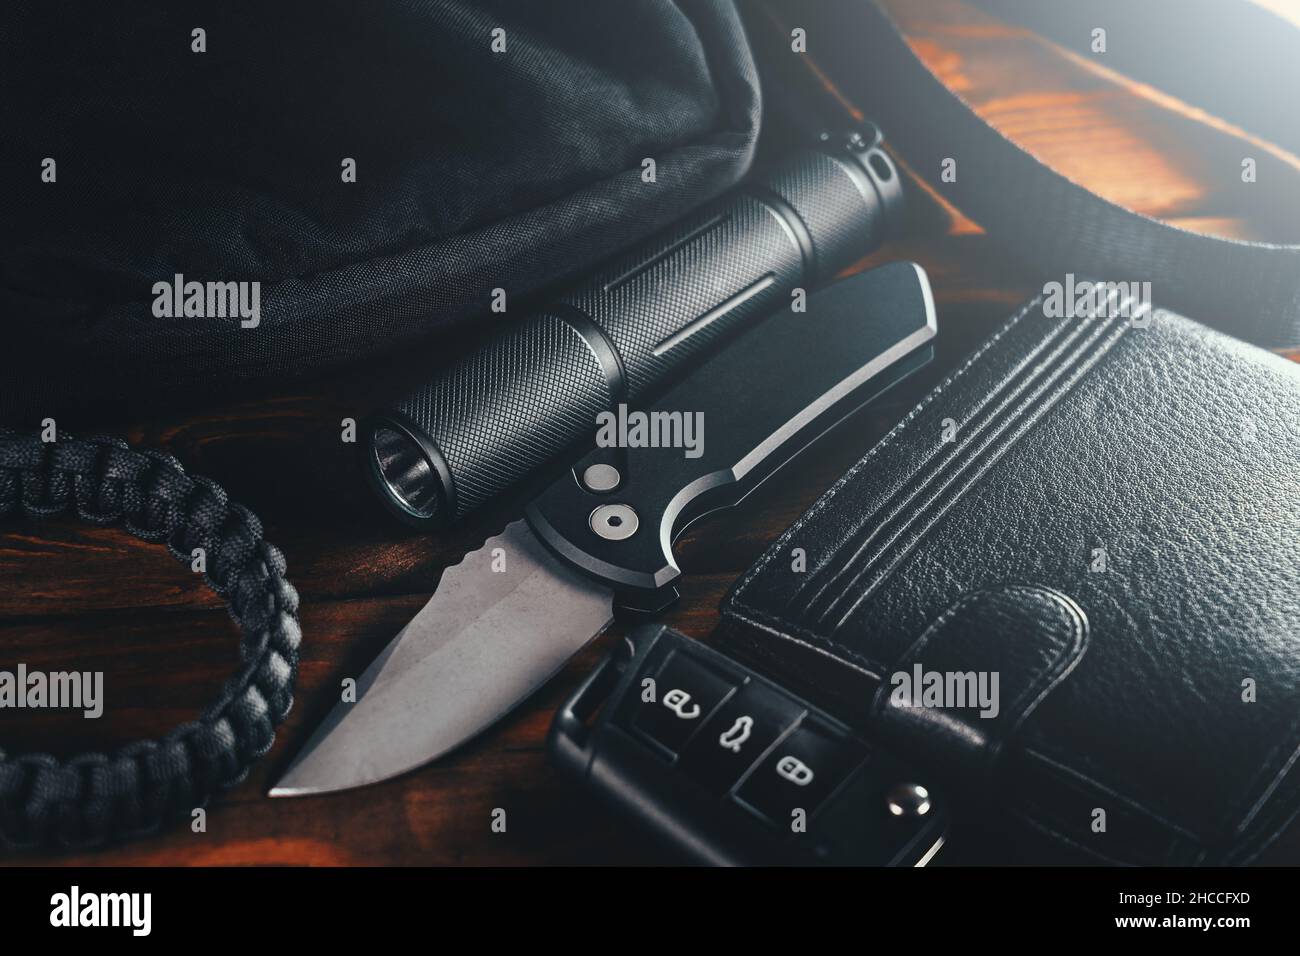 EDC set. Items for Everyday Carry use. Automatic Knife, car keys, paracord bracelet, wallet and tactical bag. Accessories in urban military style for man. Stock Photo